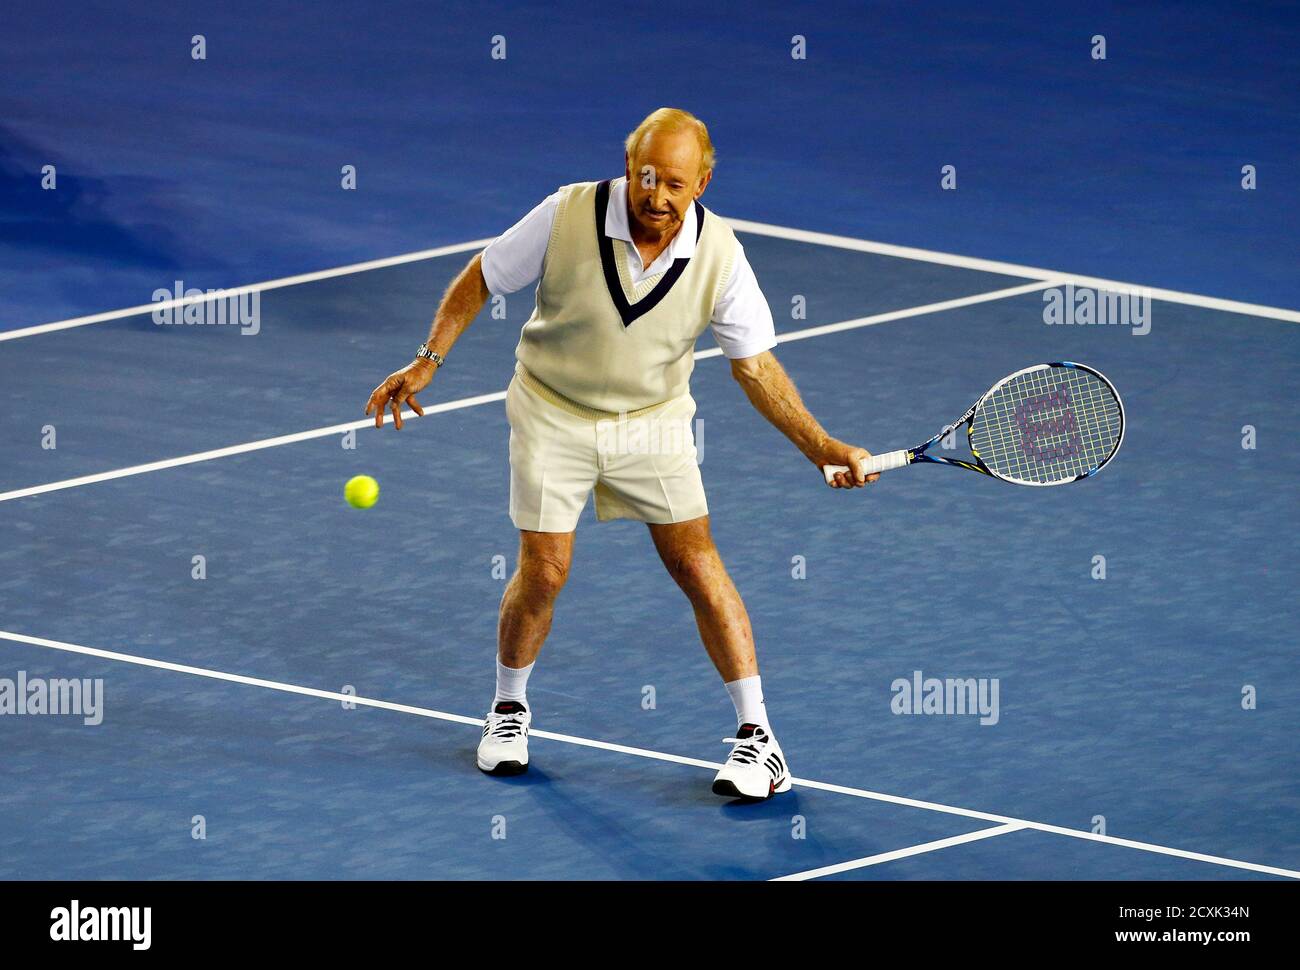 Australian tennis legend Rod Laver plays a shot against Switzerland's Roger  Federer at Rod Laver Arena during a charity event in Melbourne January 8,  2014. REUTERS/David Gray (AUSTRALIA - Tags: SPORT TENNIS